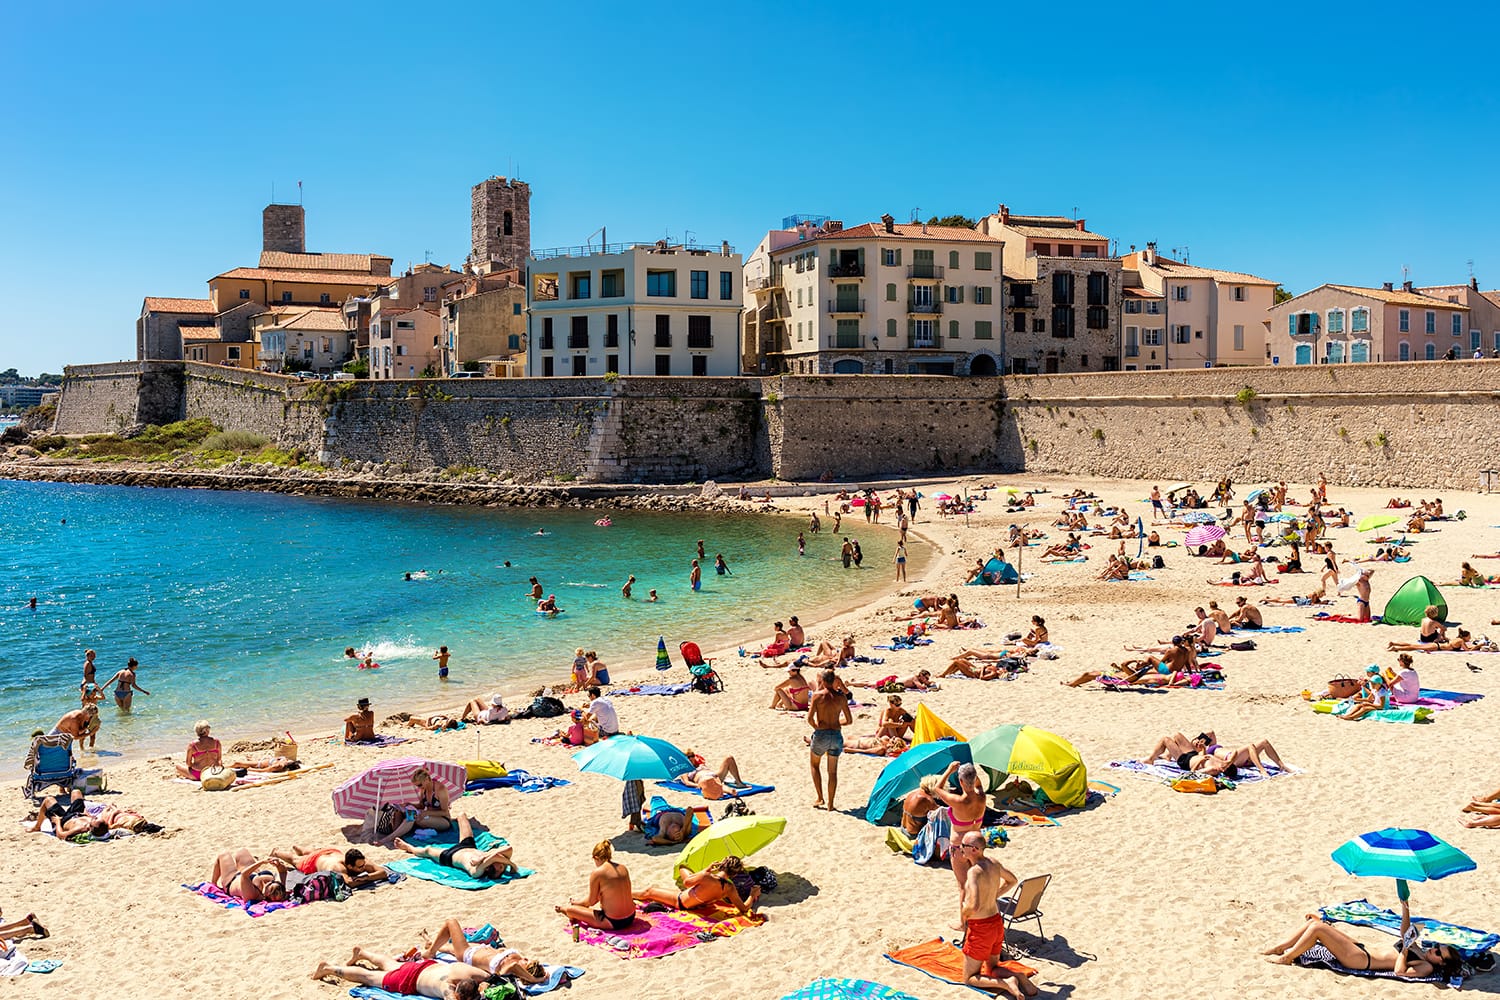 People on Plage de la Gravette - famous and popular sand beach near the Old Town of Antibes, France.